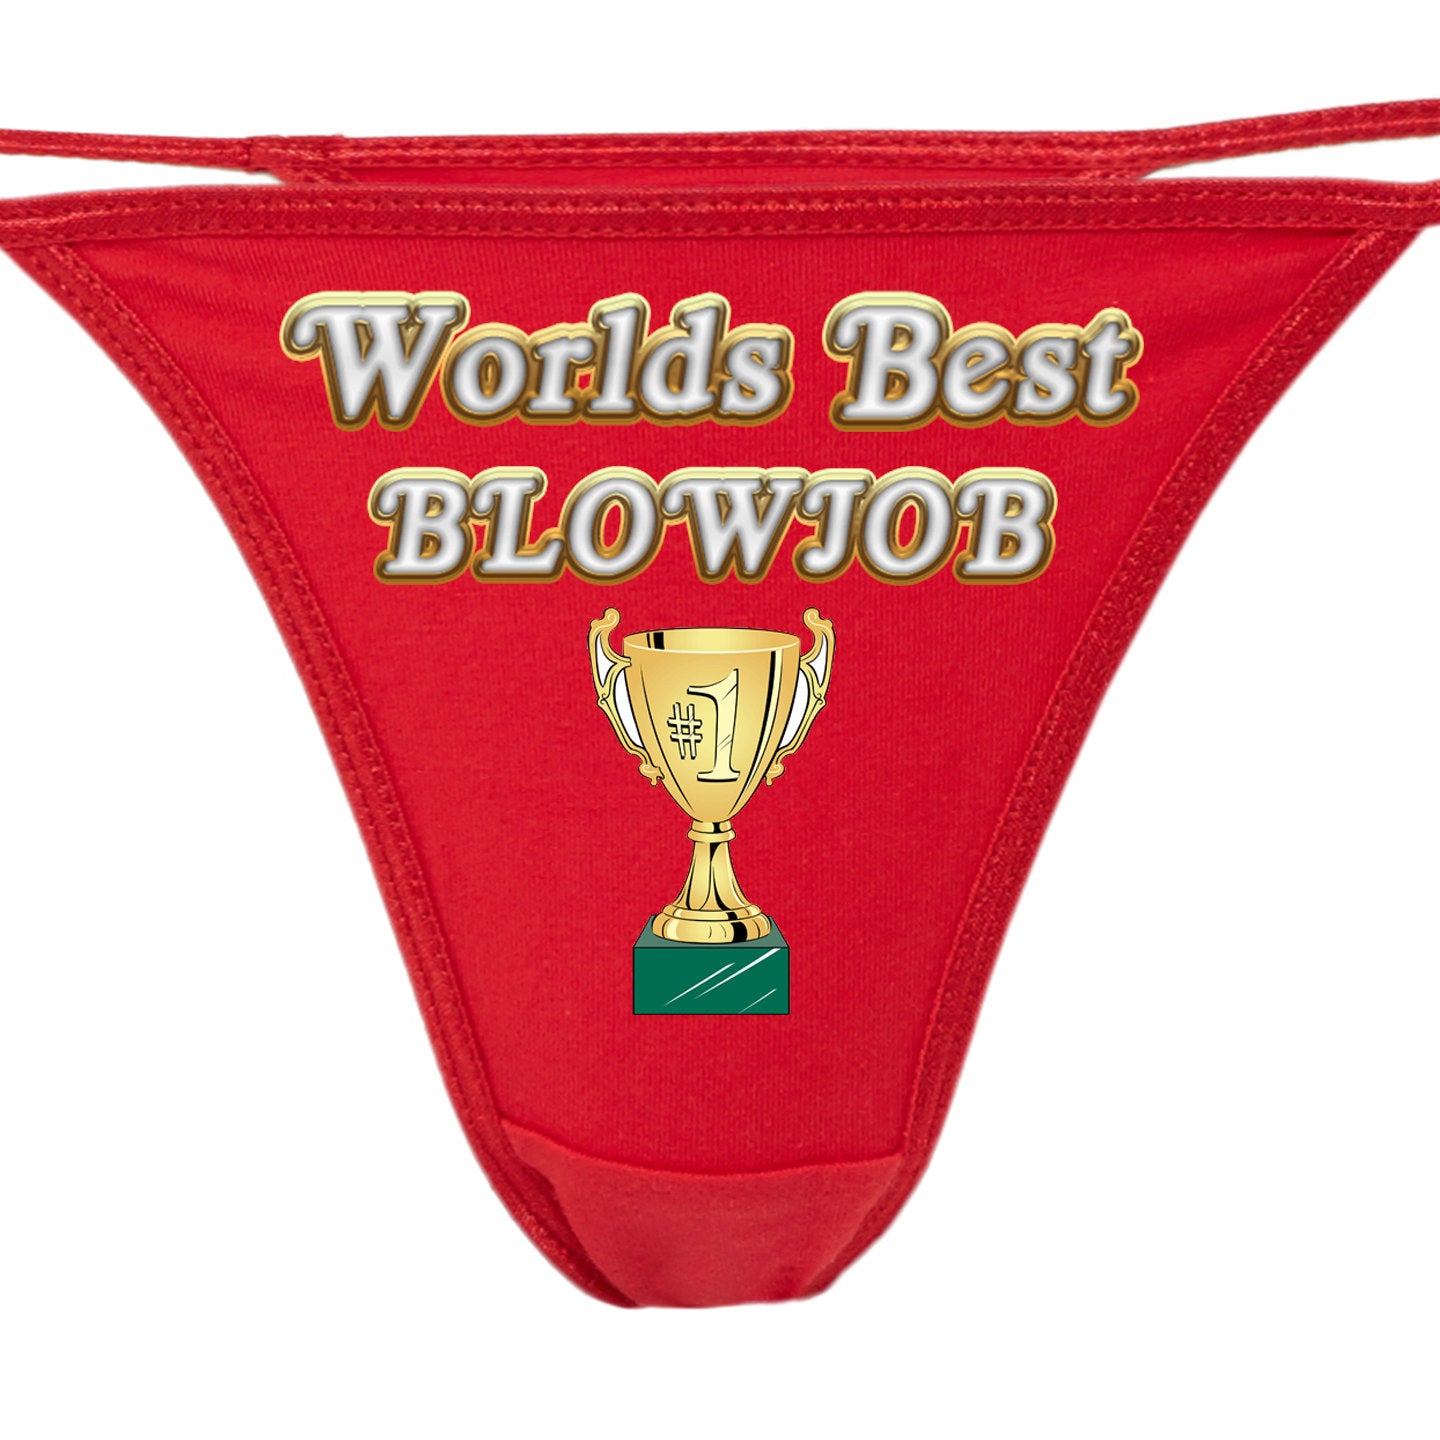 WORLDS BEST BLOWJOB thong underwear sexy funny great blow job gag gift picture